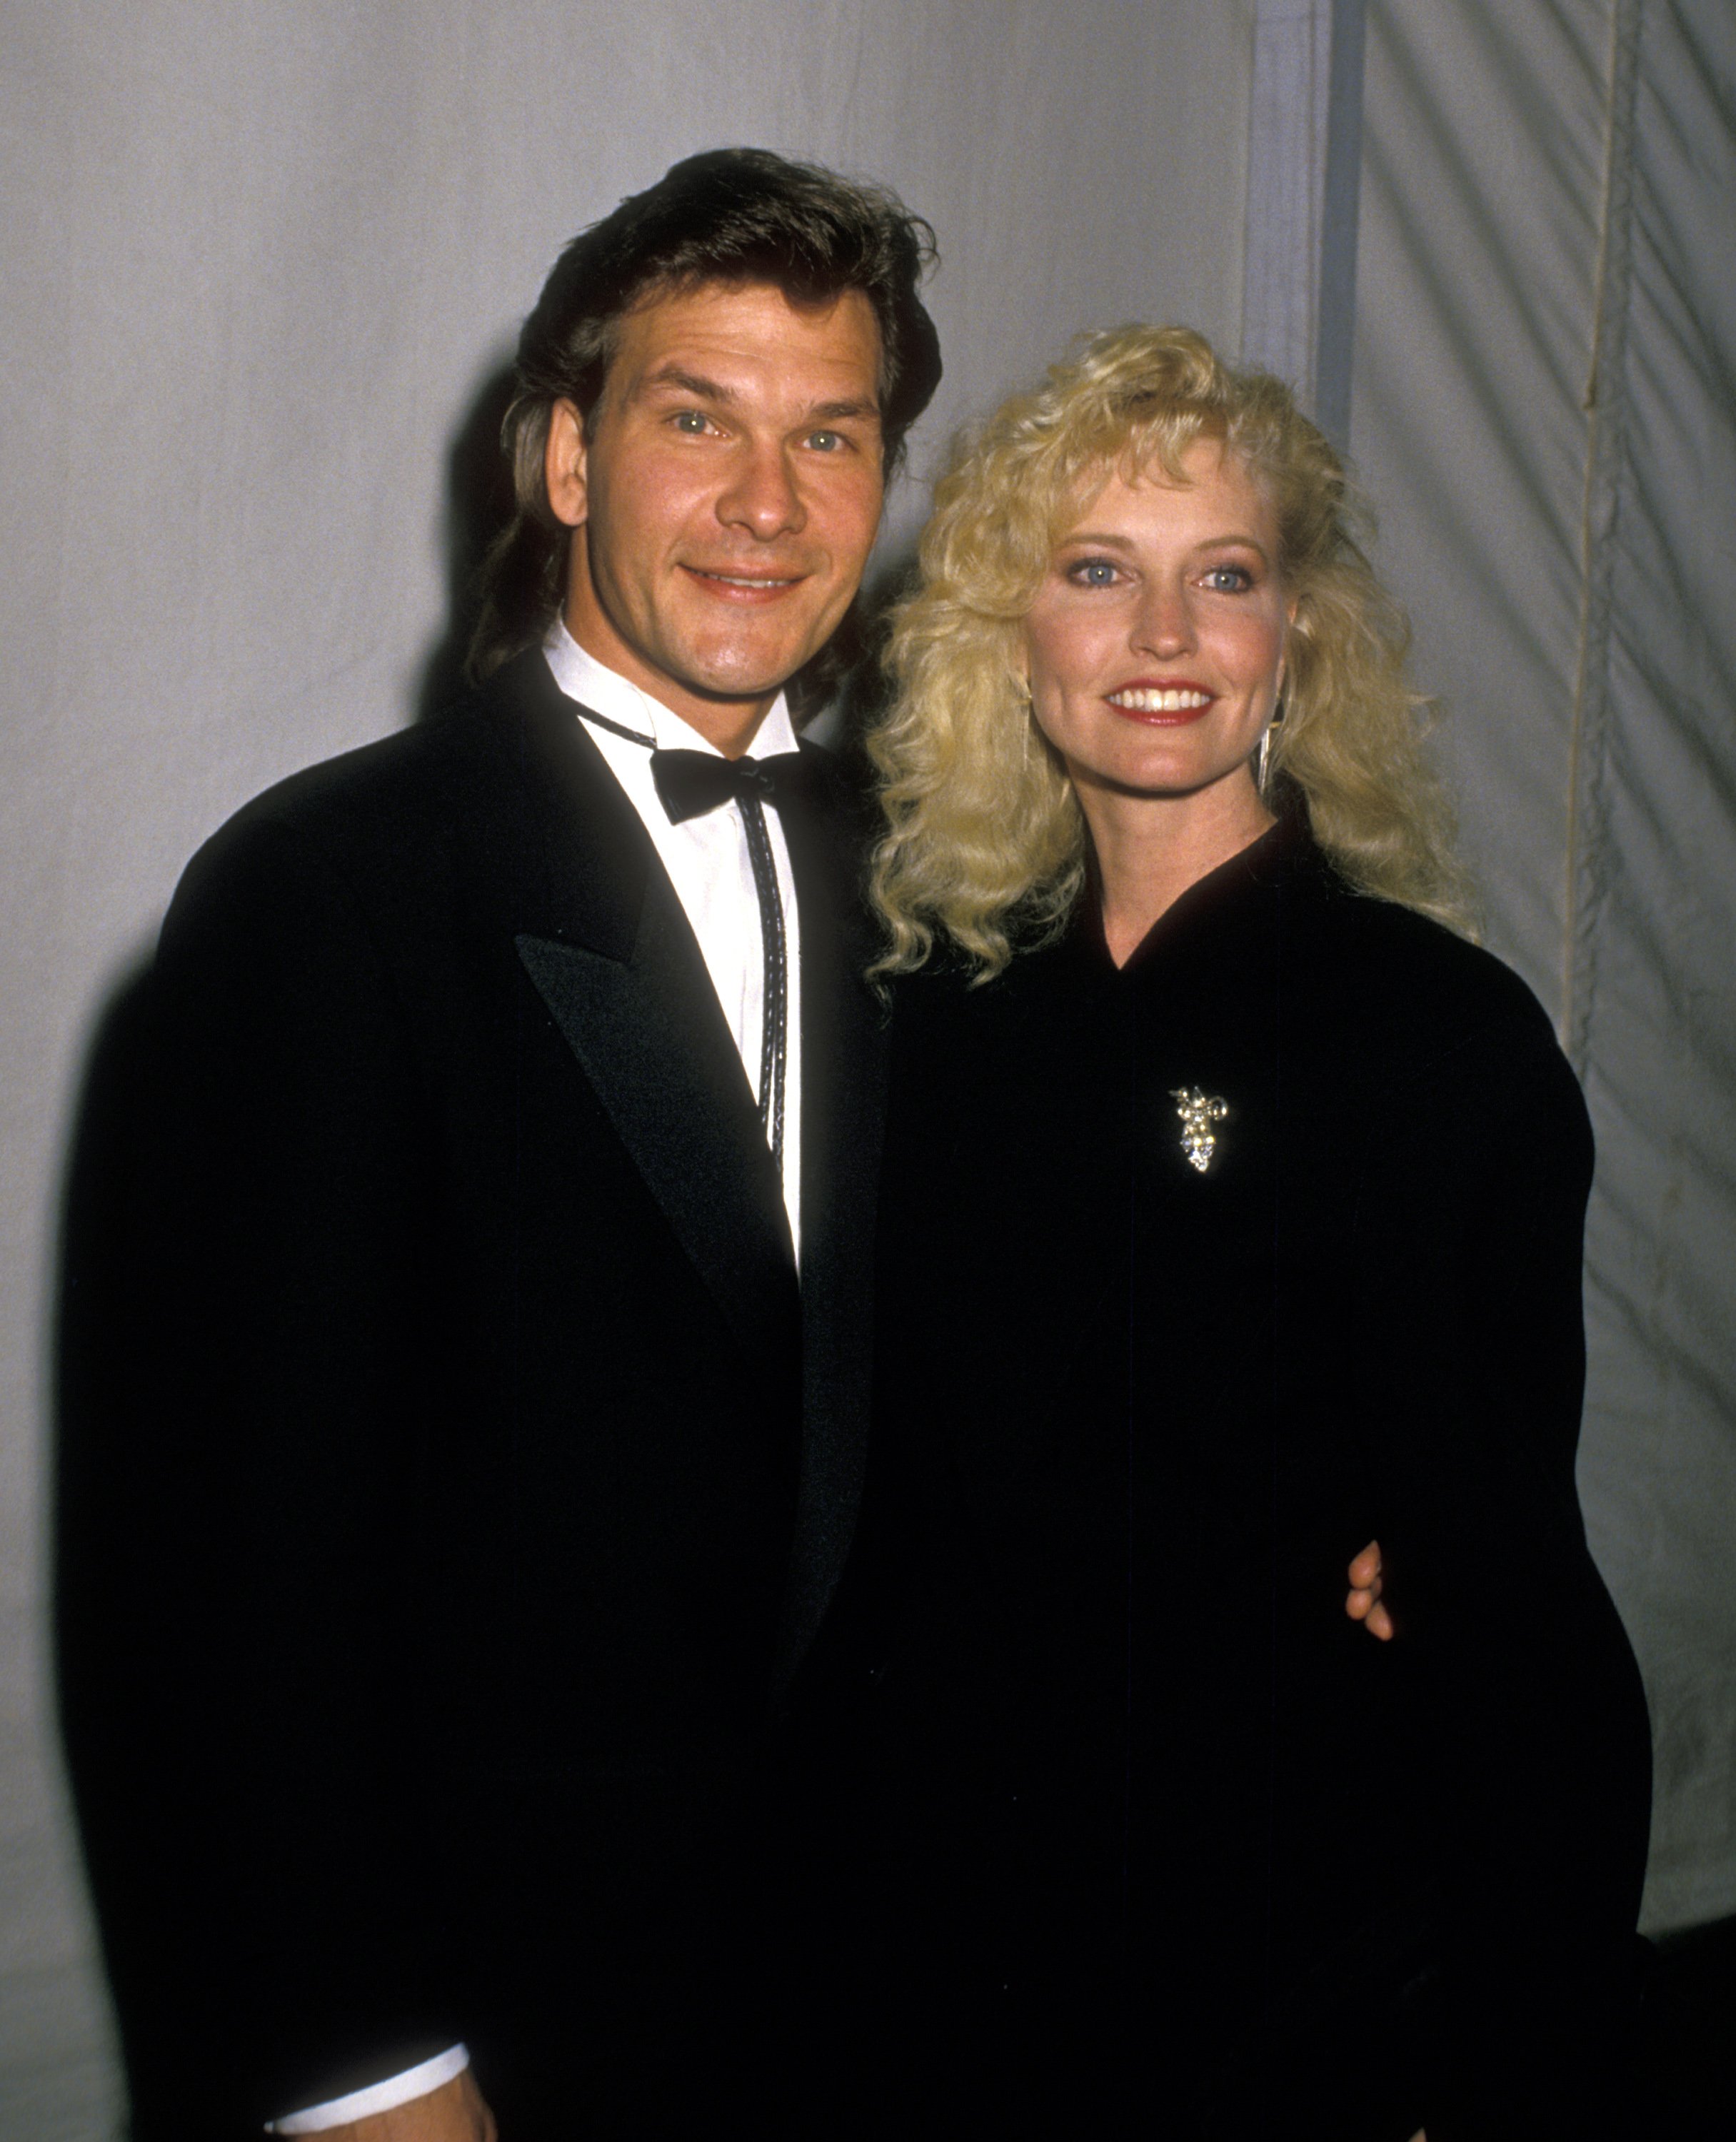 Patrick Swayze and Lisa Niemi at the 15th Annual American Music Awards on January 25, 1988, in Los Angeles, California. | Source: Getty Images